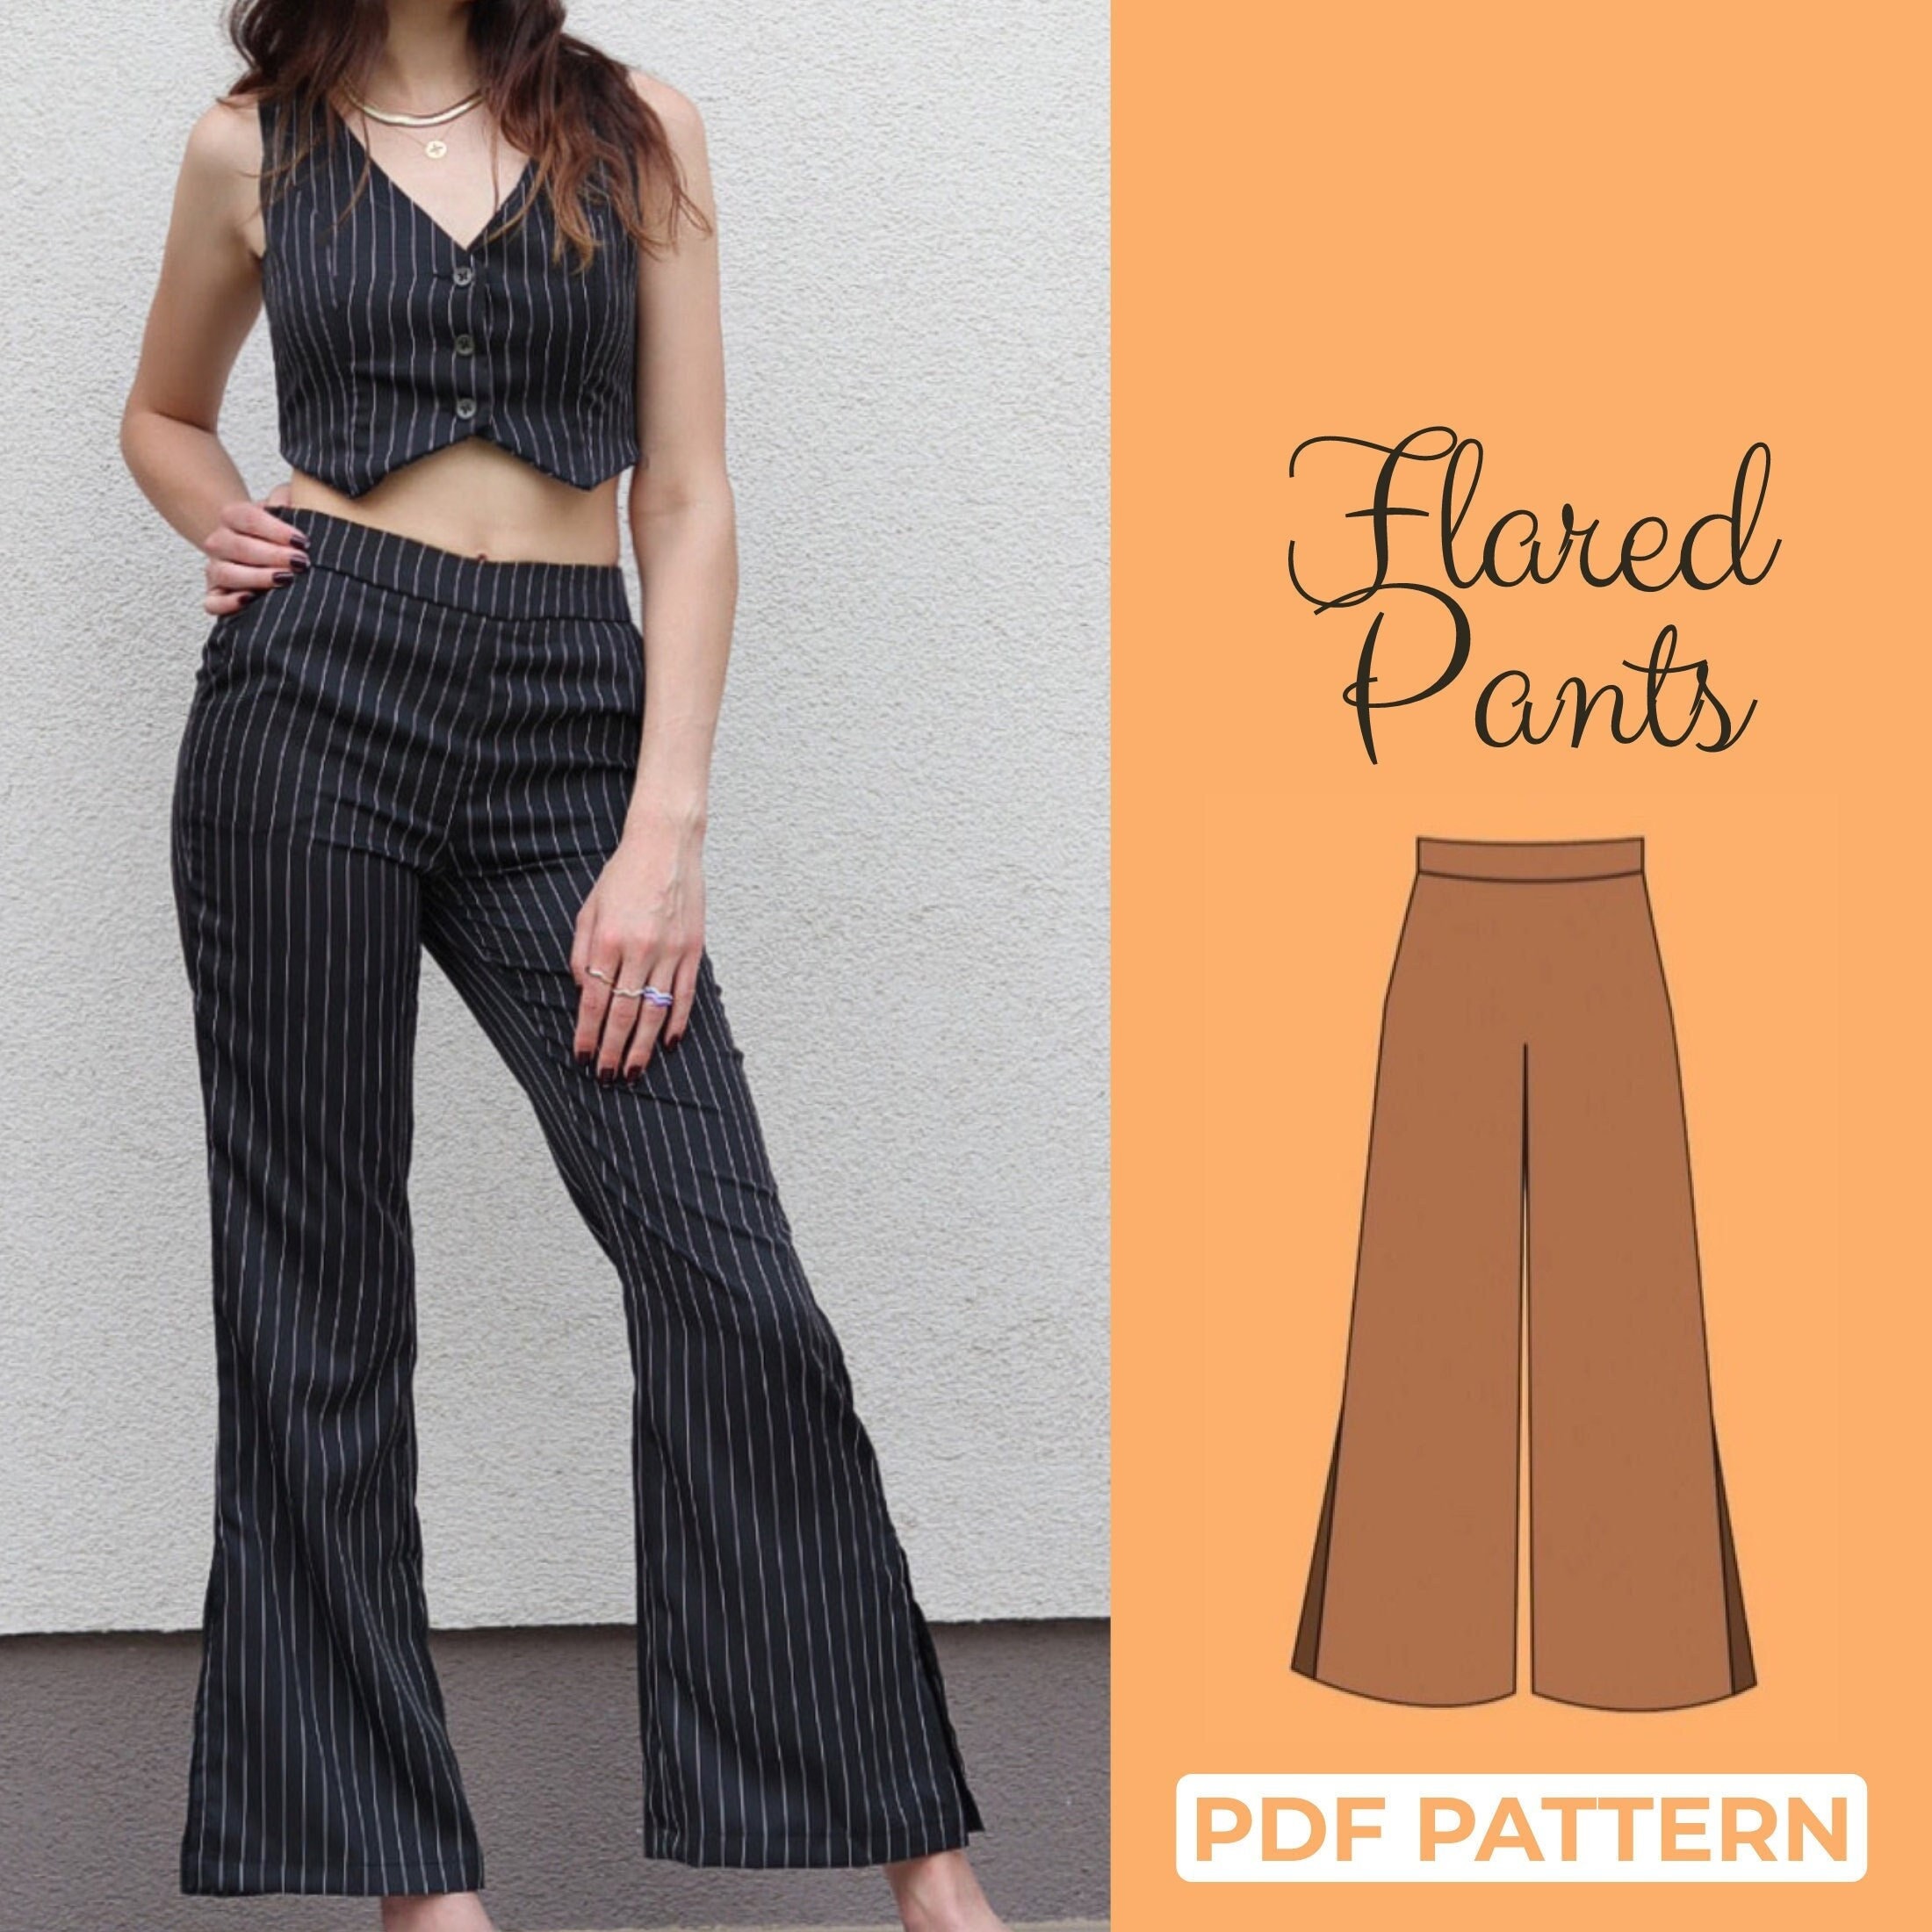 Flare Leg Pants Sewing Pattern PDF Sizes XS to XL Pants With Waistband  comfortable digital Download 